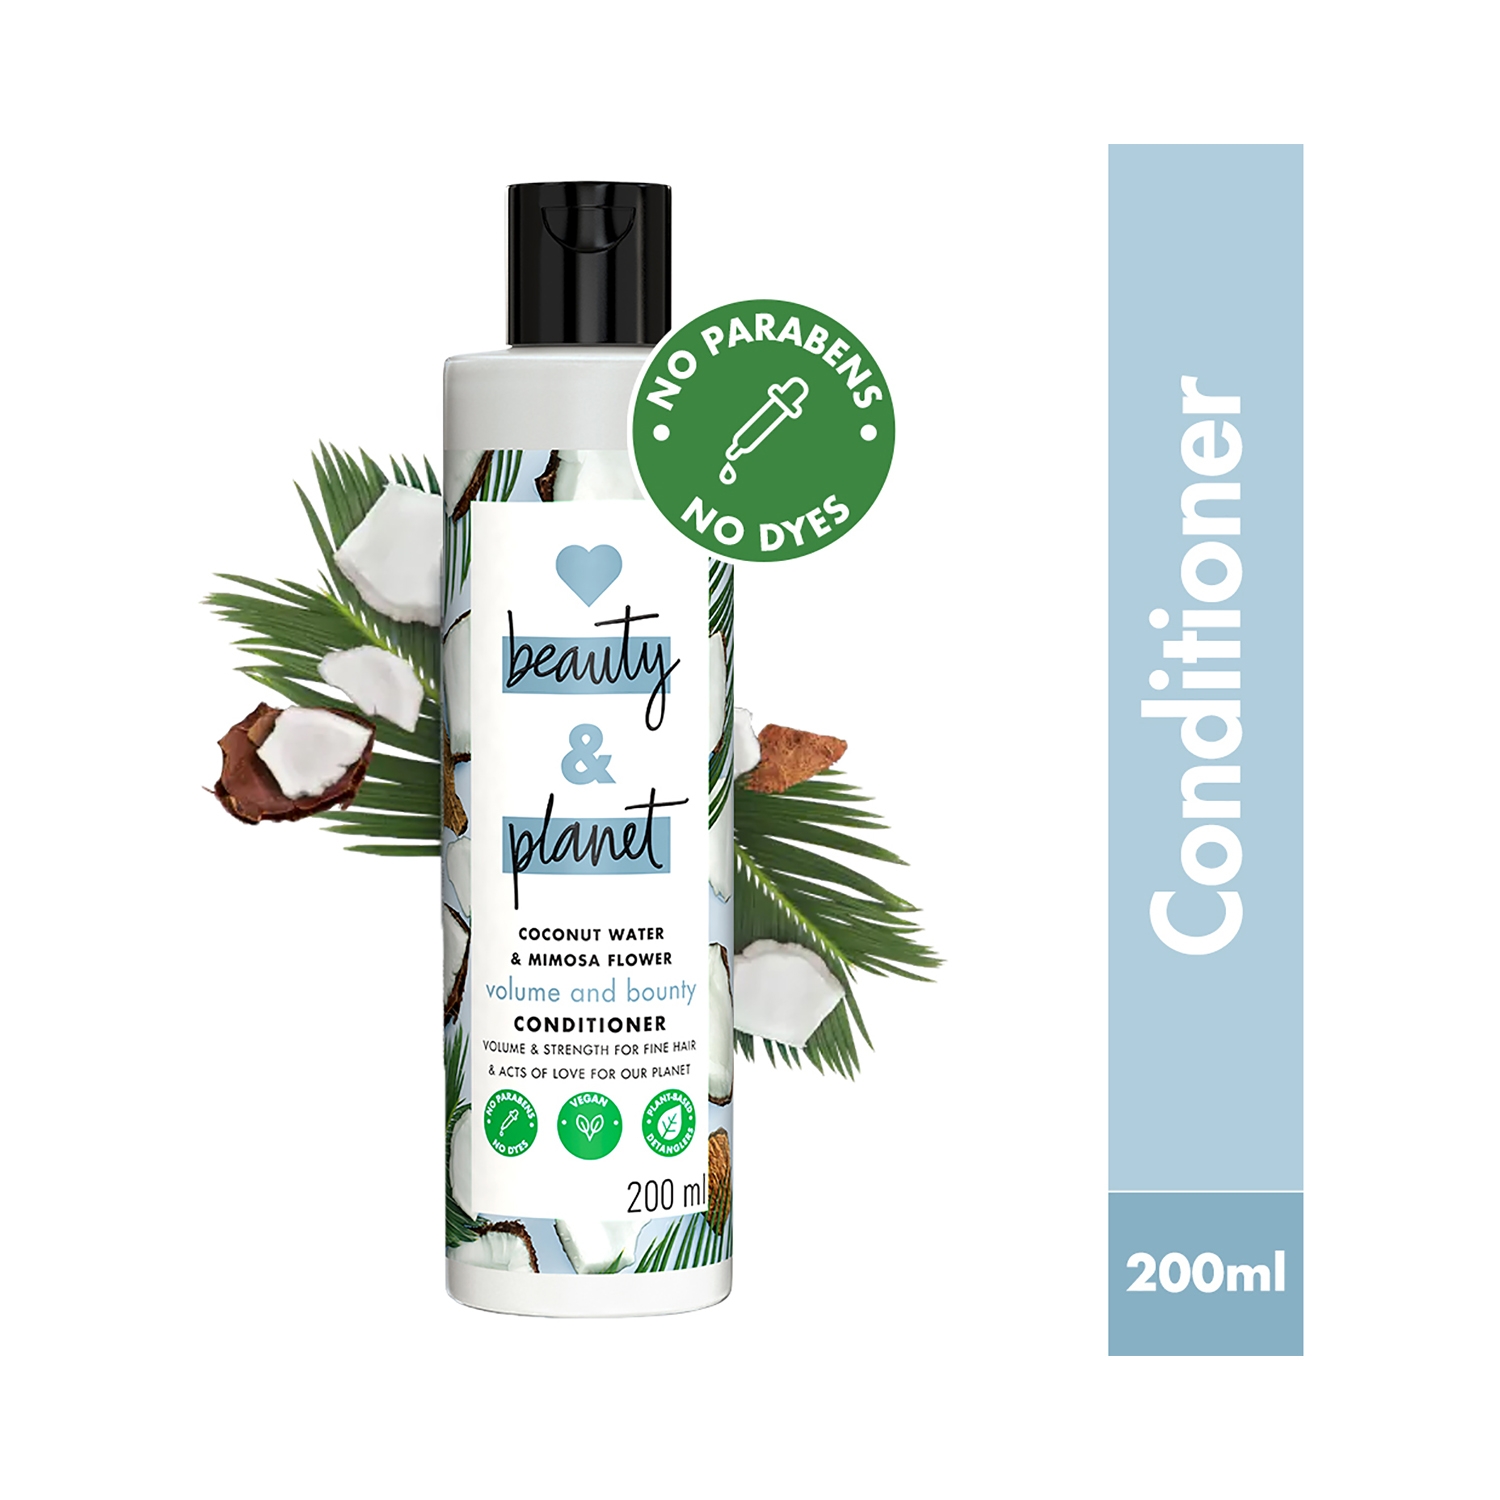 Love Beauty & Planet | Love Beauty & Planet Coconut Water and Mimosa Flower Volume and Bounty Conditioner (200ml)